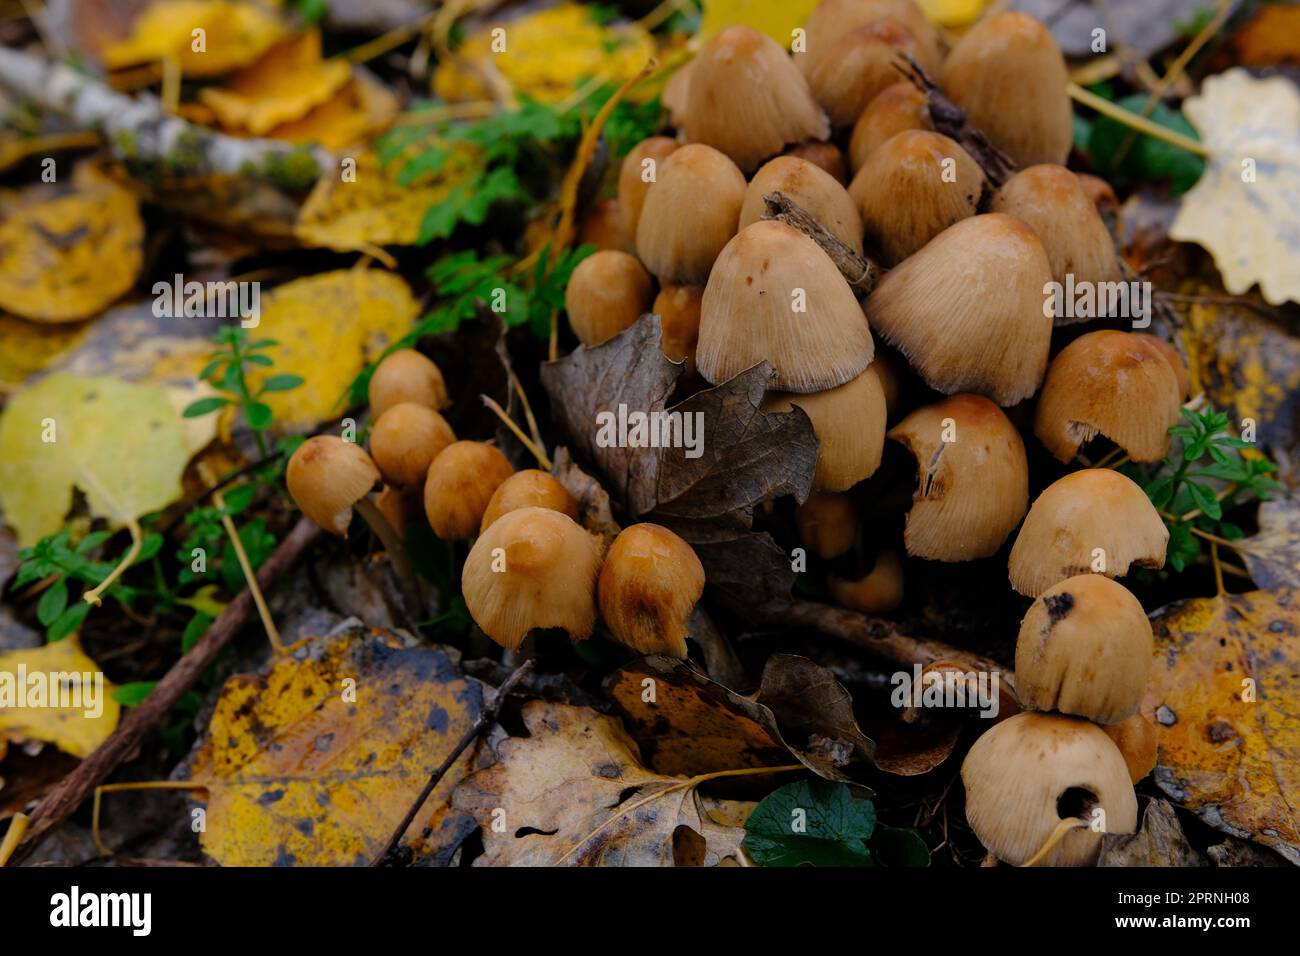 mushroom Coprinellus micaceus. Group of mushrooms on woods in nature in autumn forest. Stock Photo